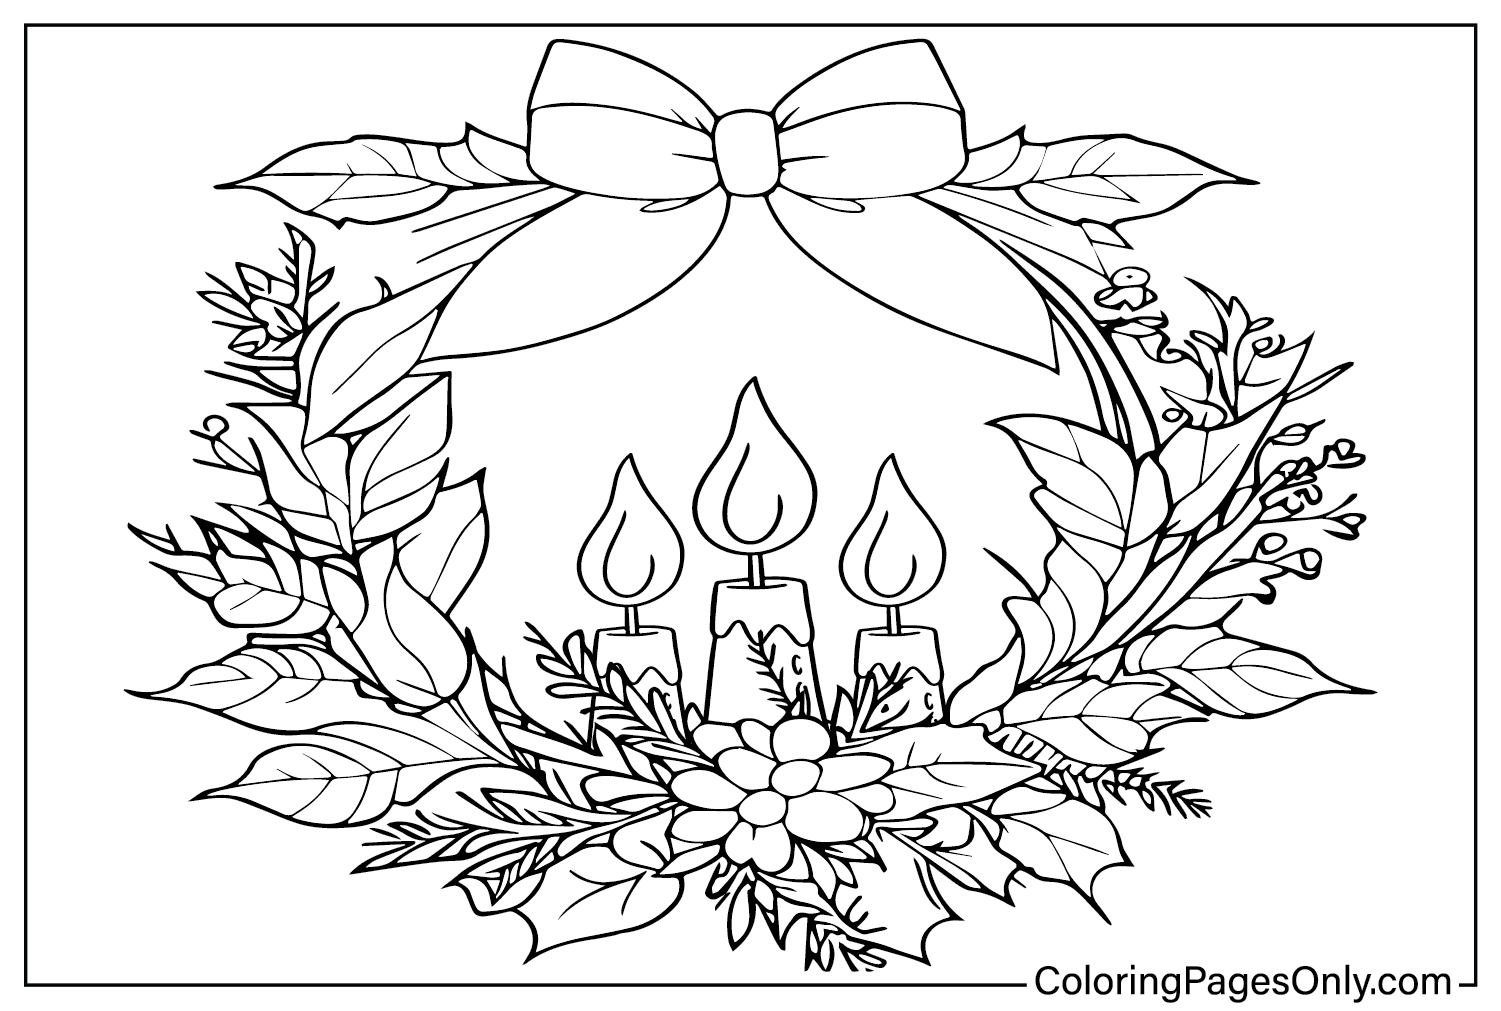 Advent Wreath Coloring Page Printable from Advent Wreath